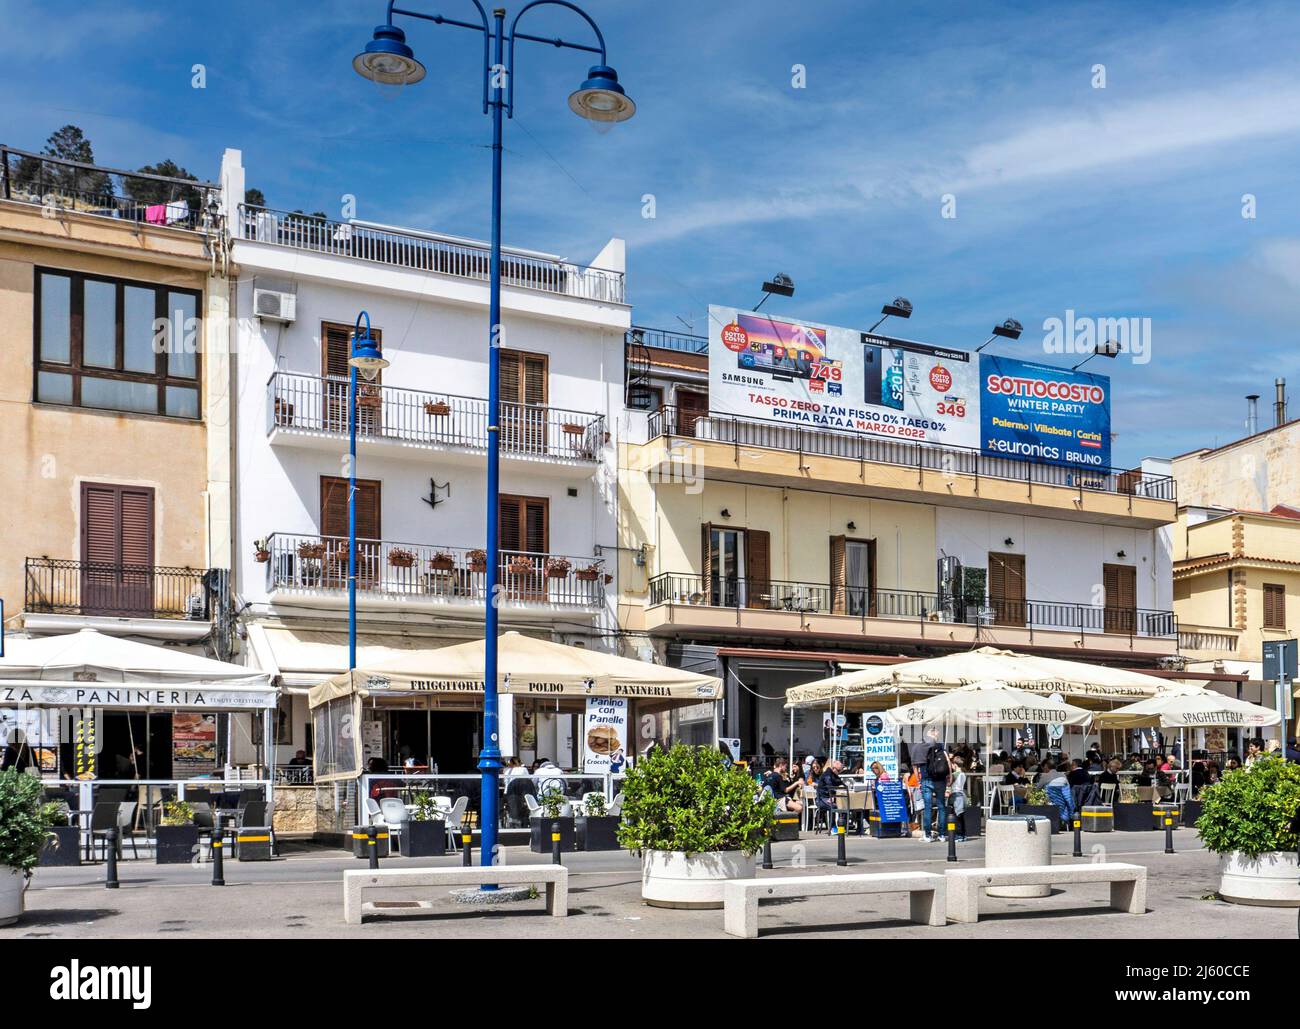 The village centre of Mondello, a small village near Palermo, Sicily, Italy with many restaurants and outdoor dining. Stock Photo